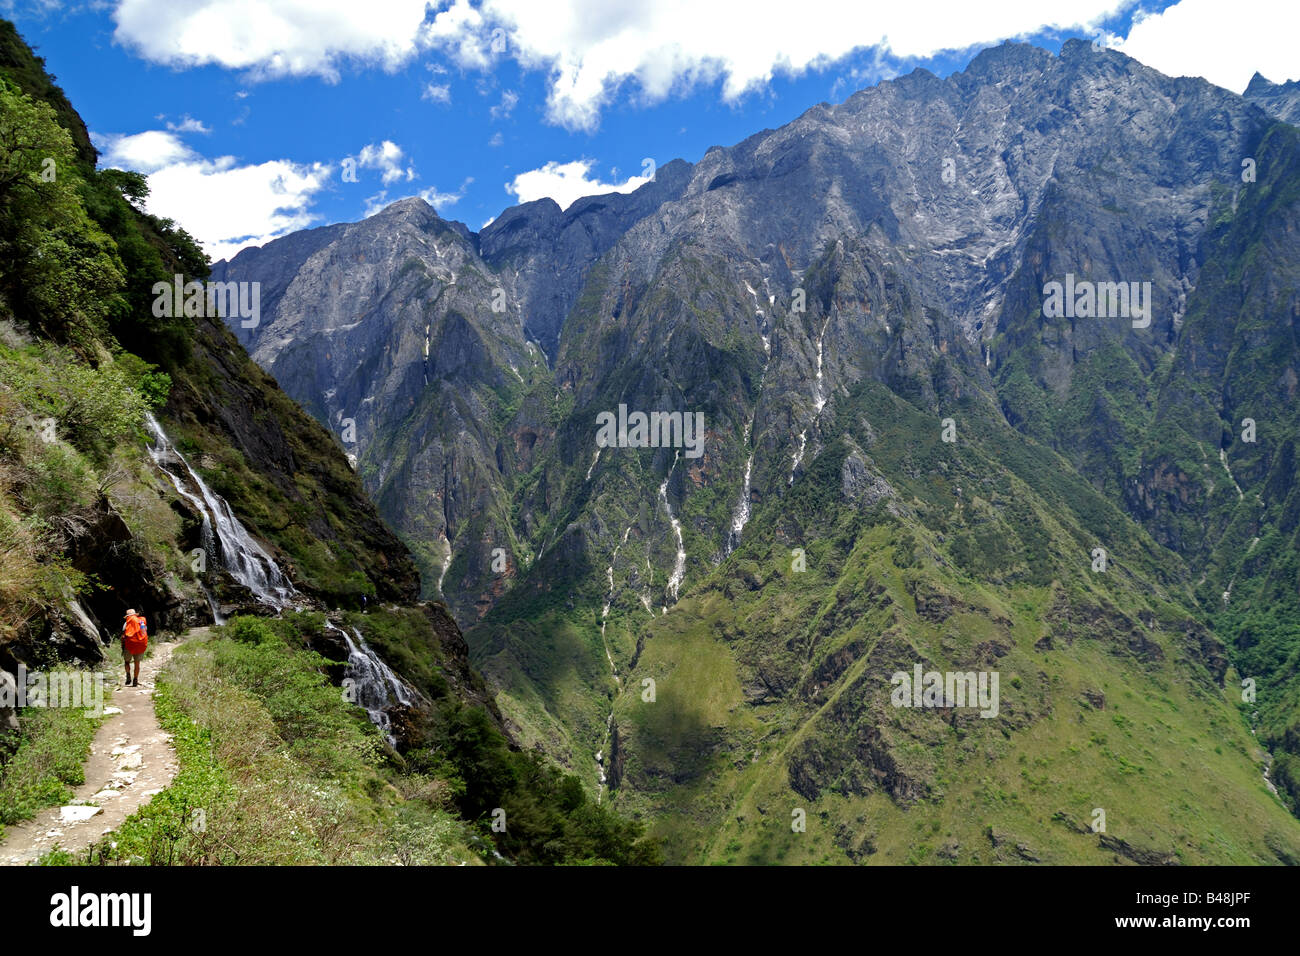 The powerful Yangtze river has carved one of the deepest river gorges into the mountains north of Lijiang. Stock Photo